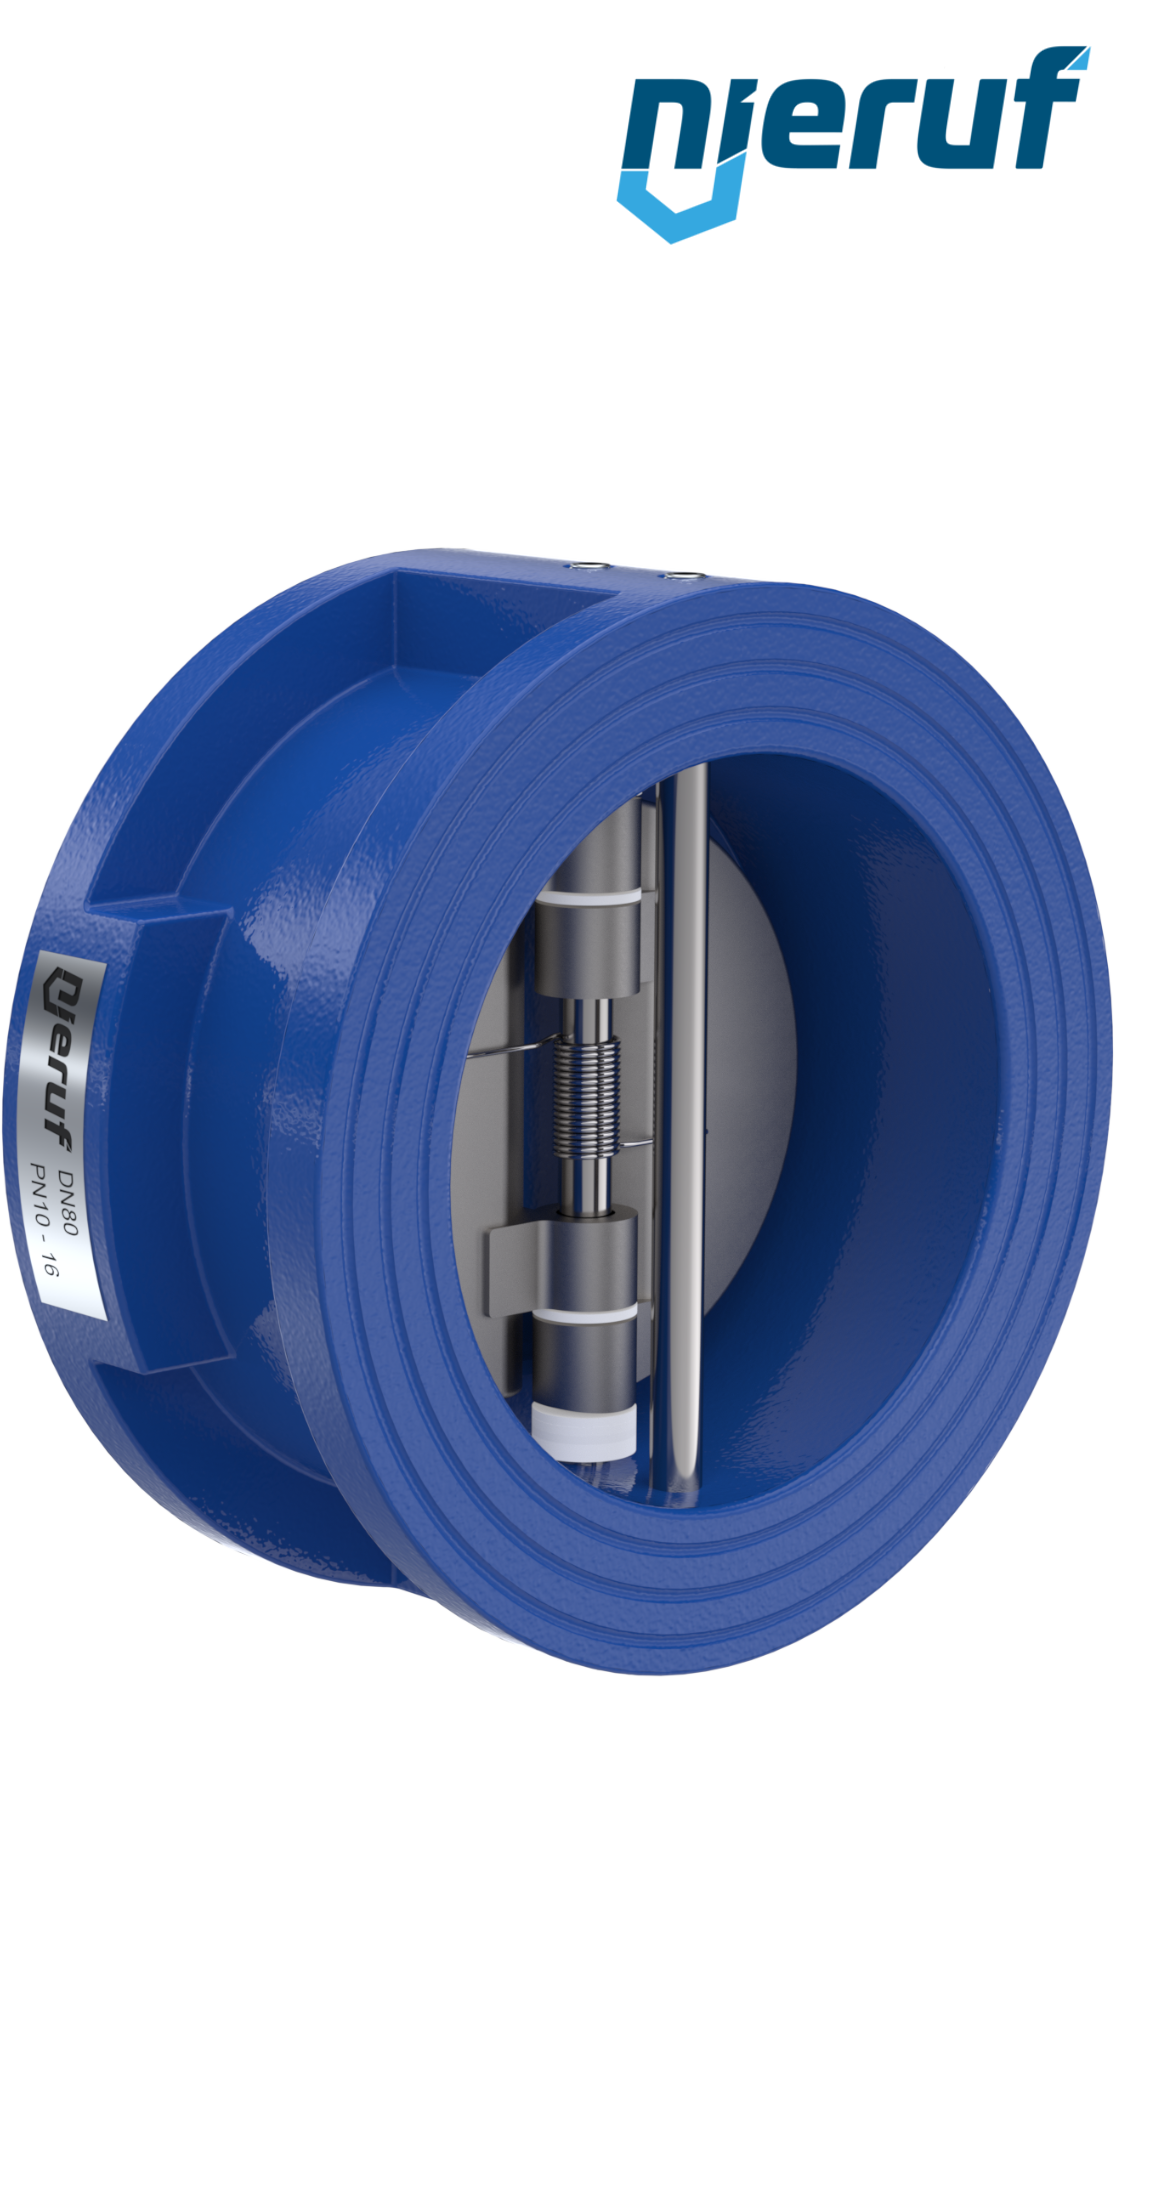 dual plate check valve DN80 DR01 GGG40 epoxyd plated blue 180µm NBR